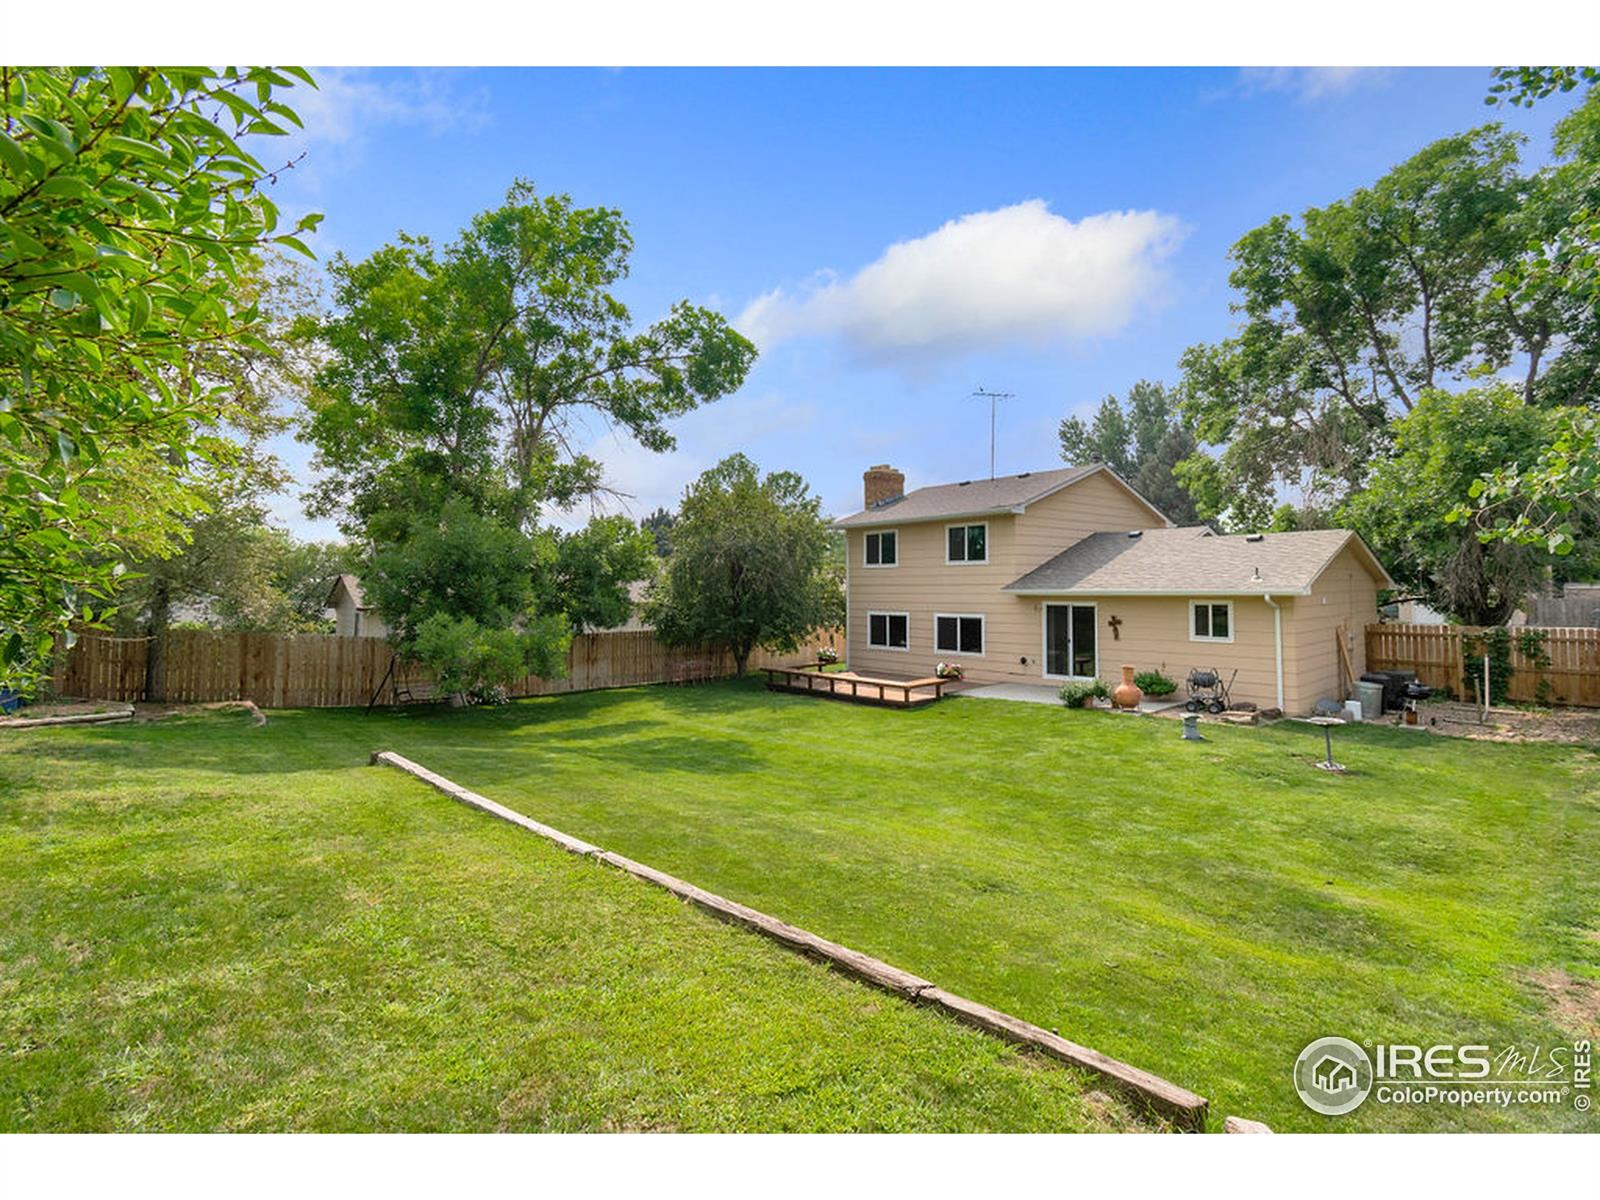 4009 13th, Greeley, CO